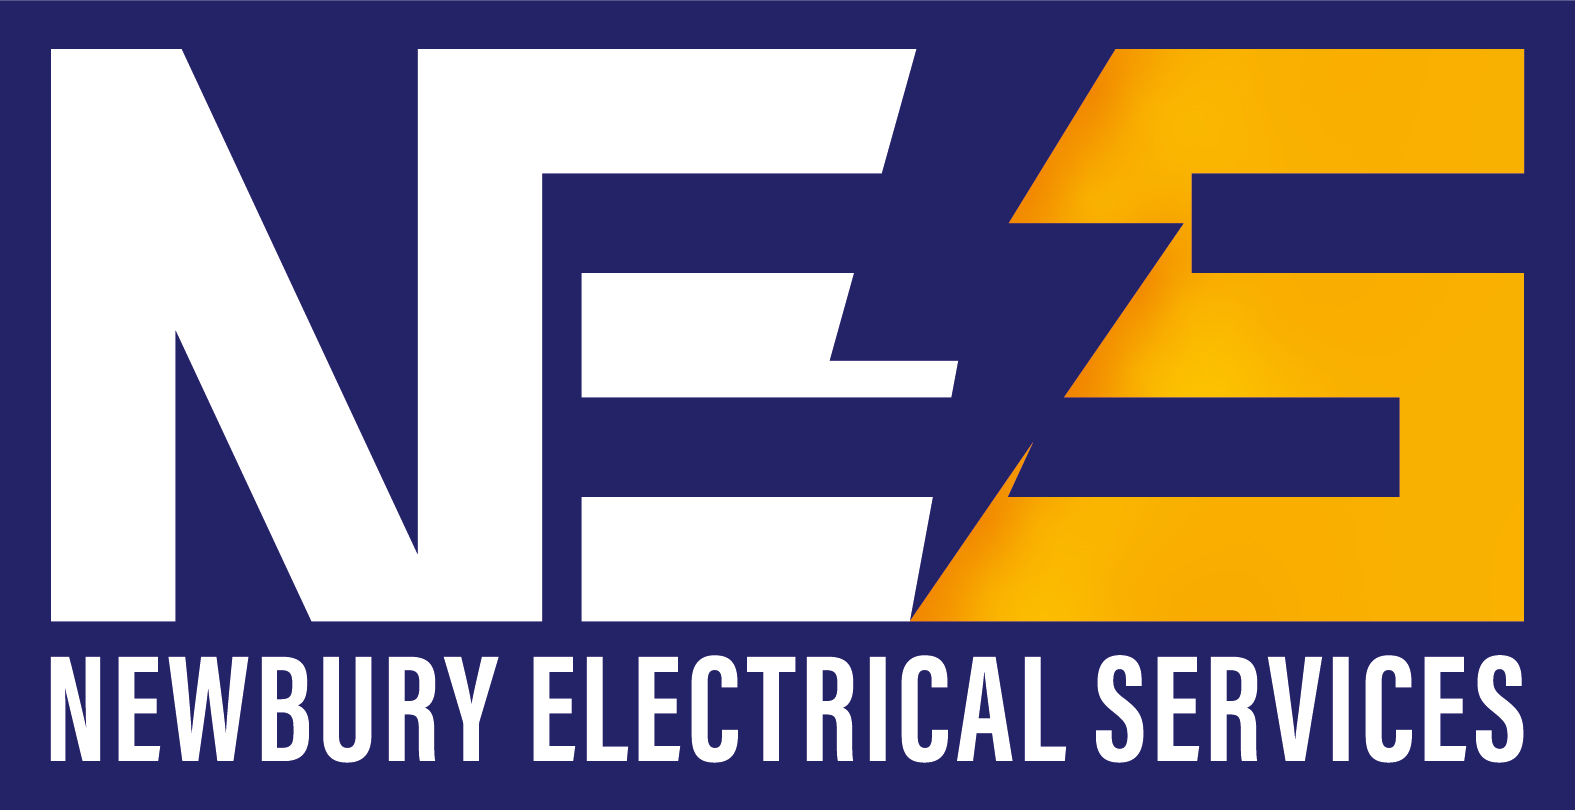 Newbury electrical services